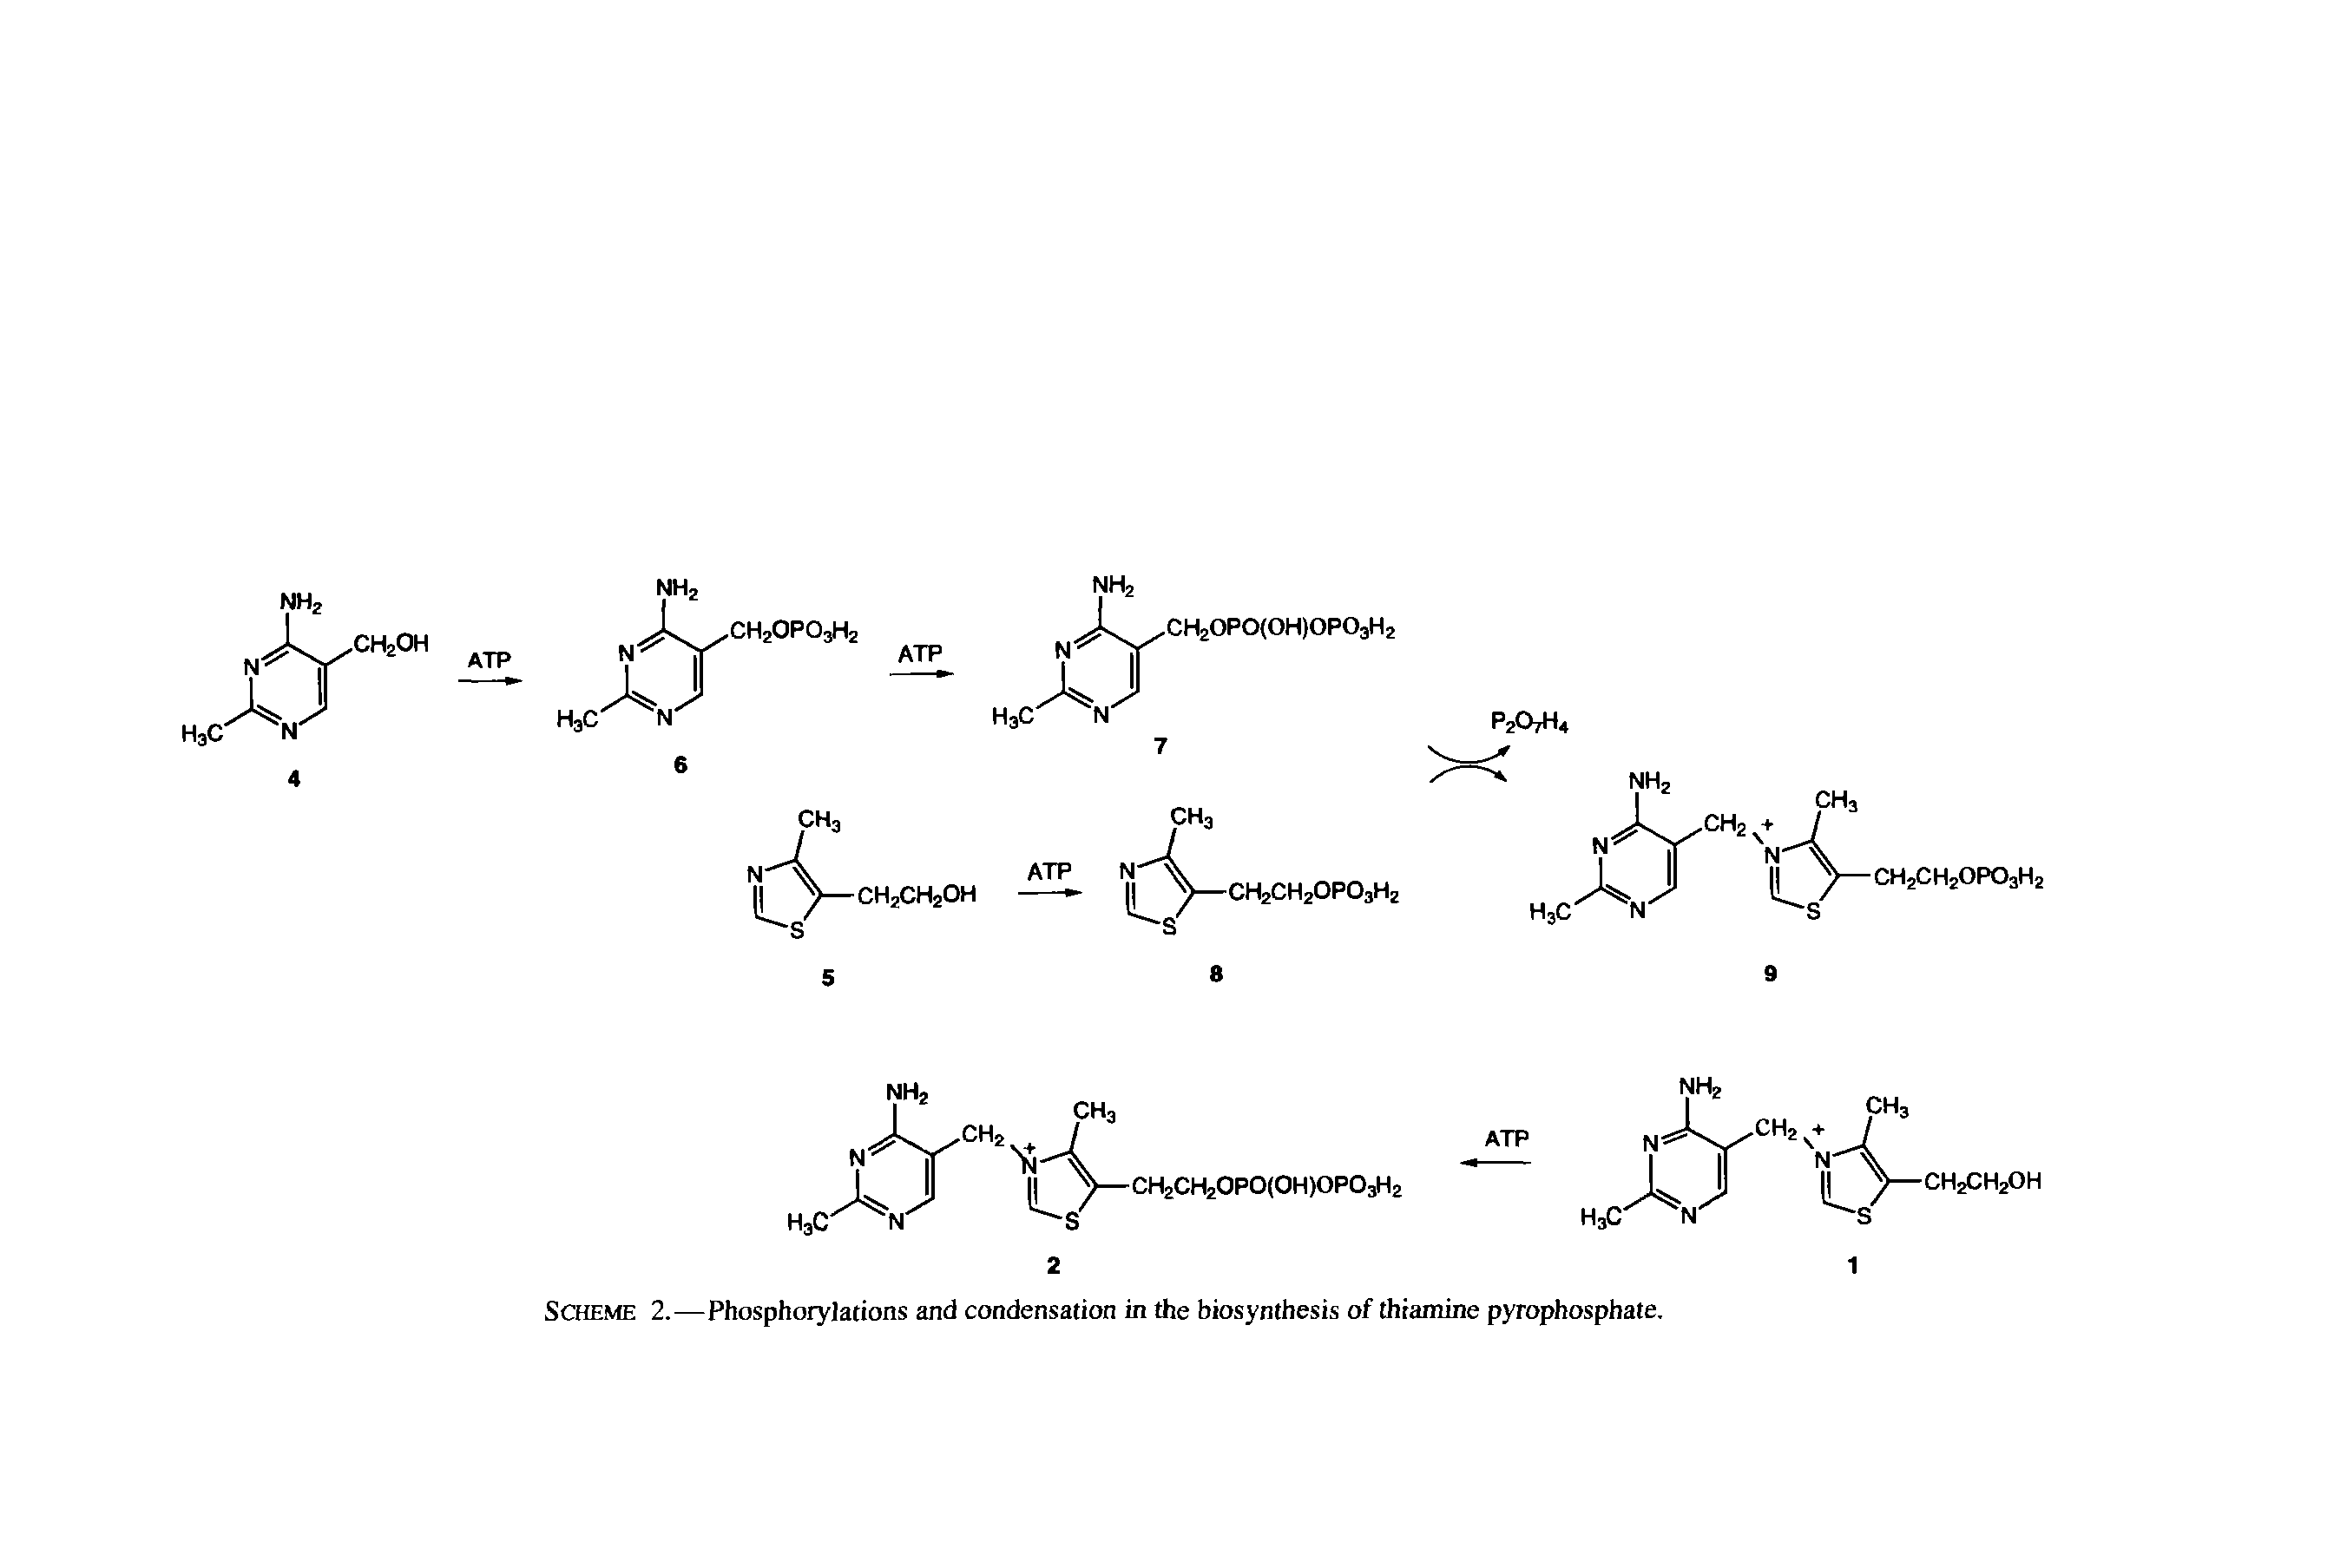 Scheme 2.—Phosphorylations and condensation in the biosynthesis of thiamine pyrophosphate.